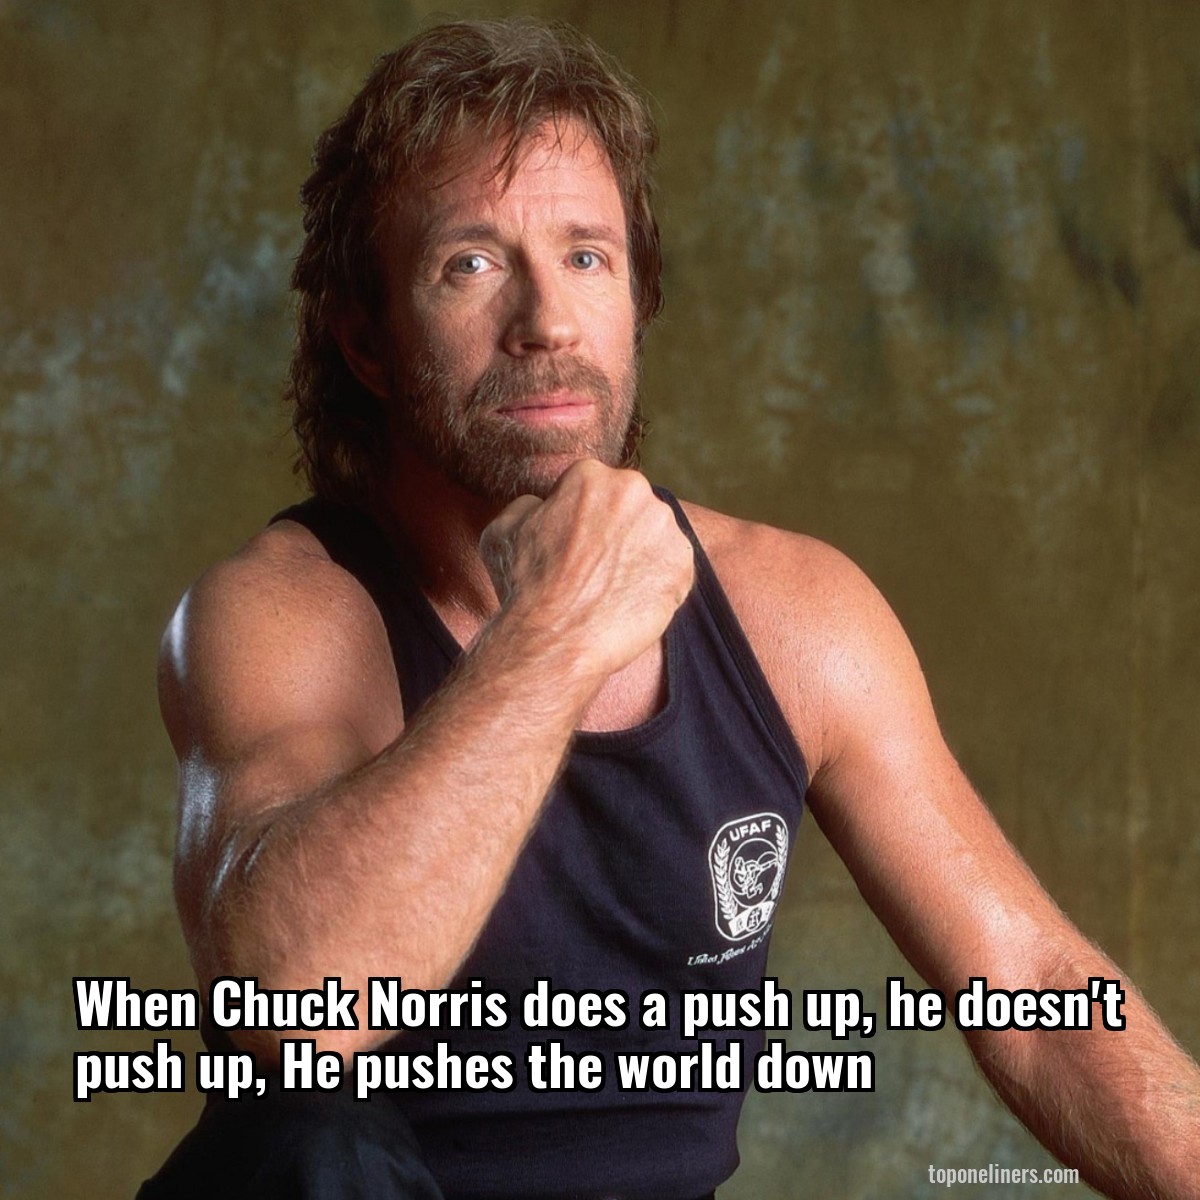 When Chuck Norris does a push up, he doesn't push up, He pushes the world down